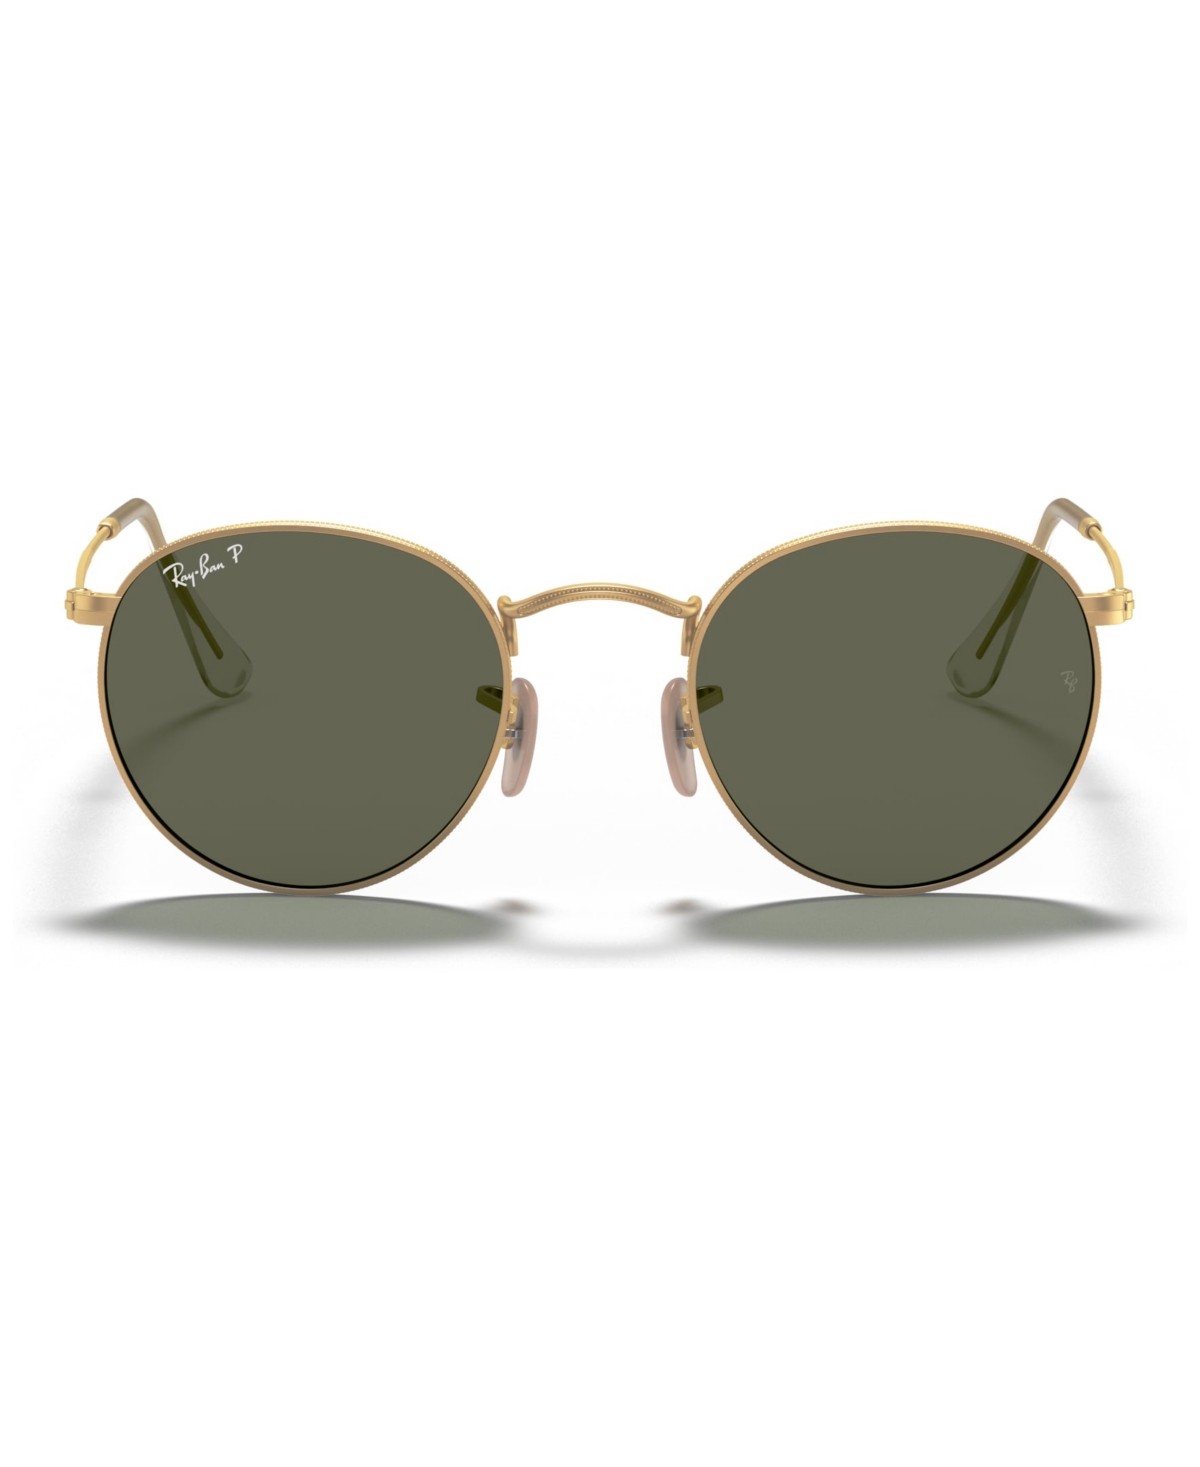 Ray Ban Polarized Sunglasses , Rb3447 Round Metal In Gold Matte,green Polar